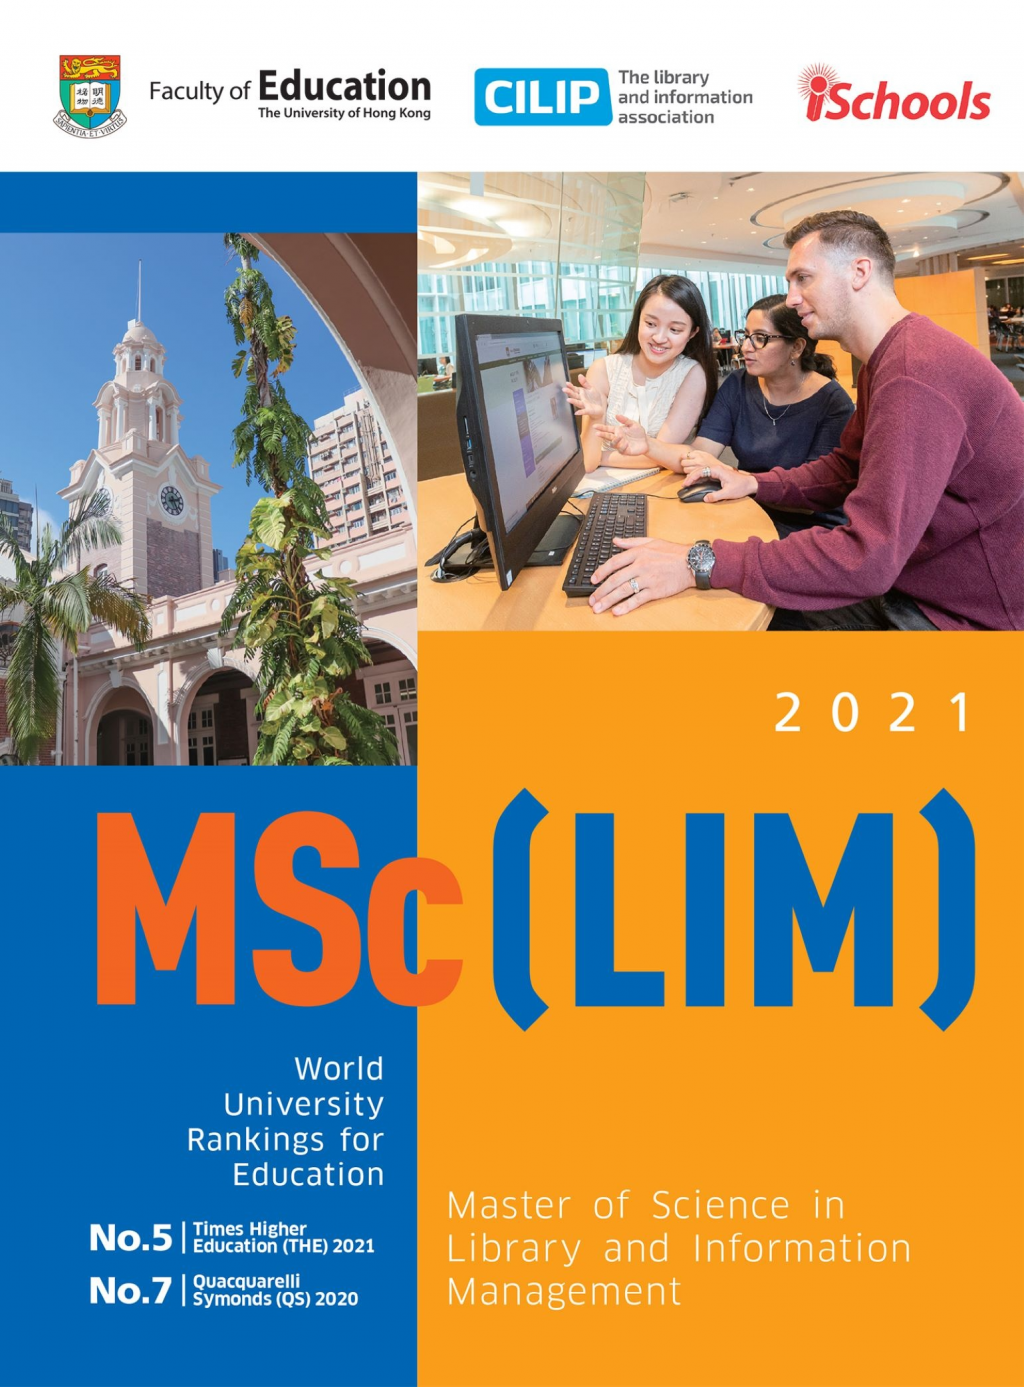 Application of Master of Science in Library and Information Management [MSc(LIM)]